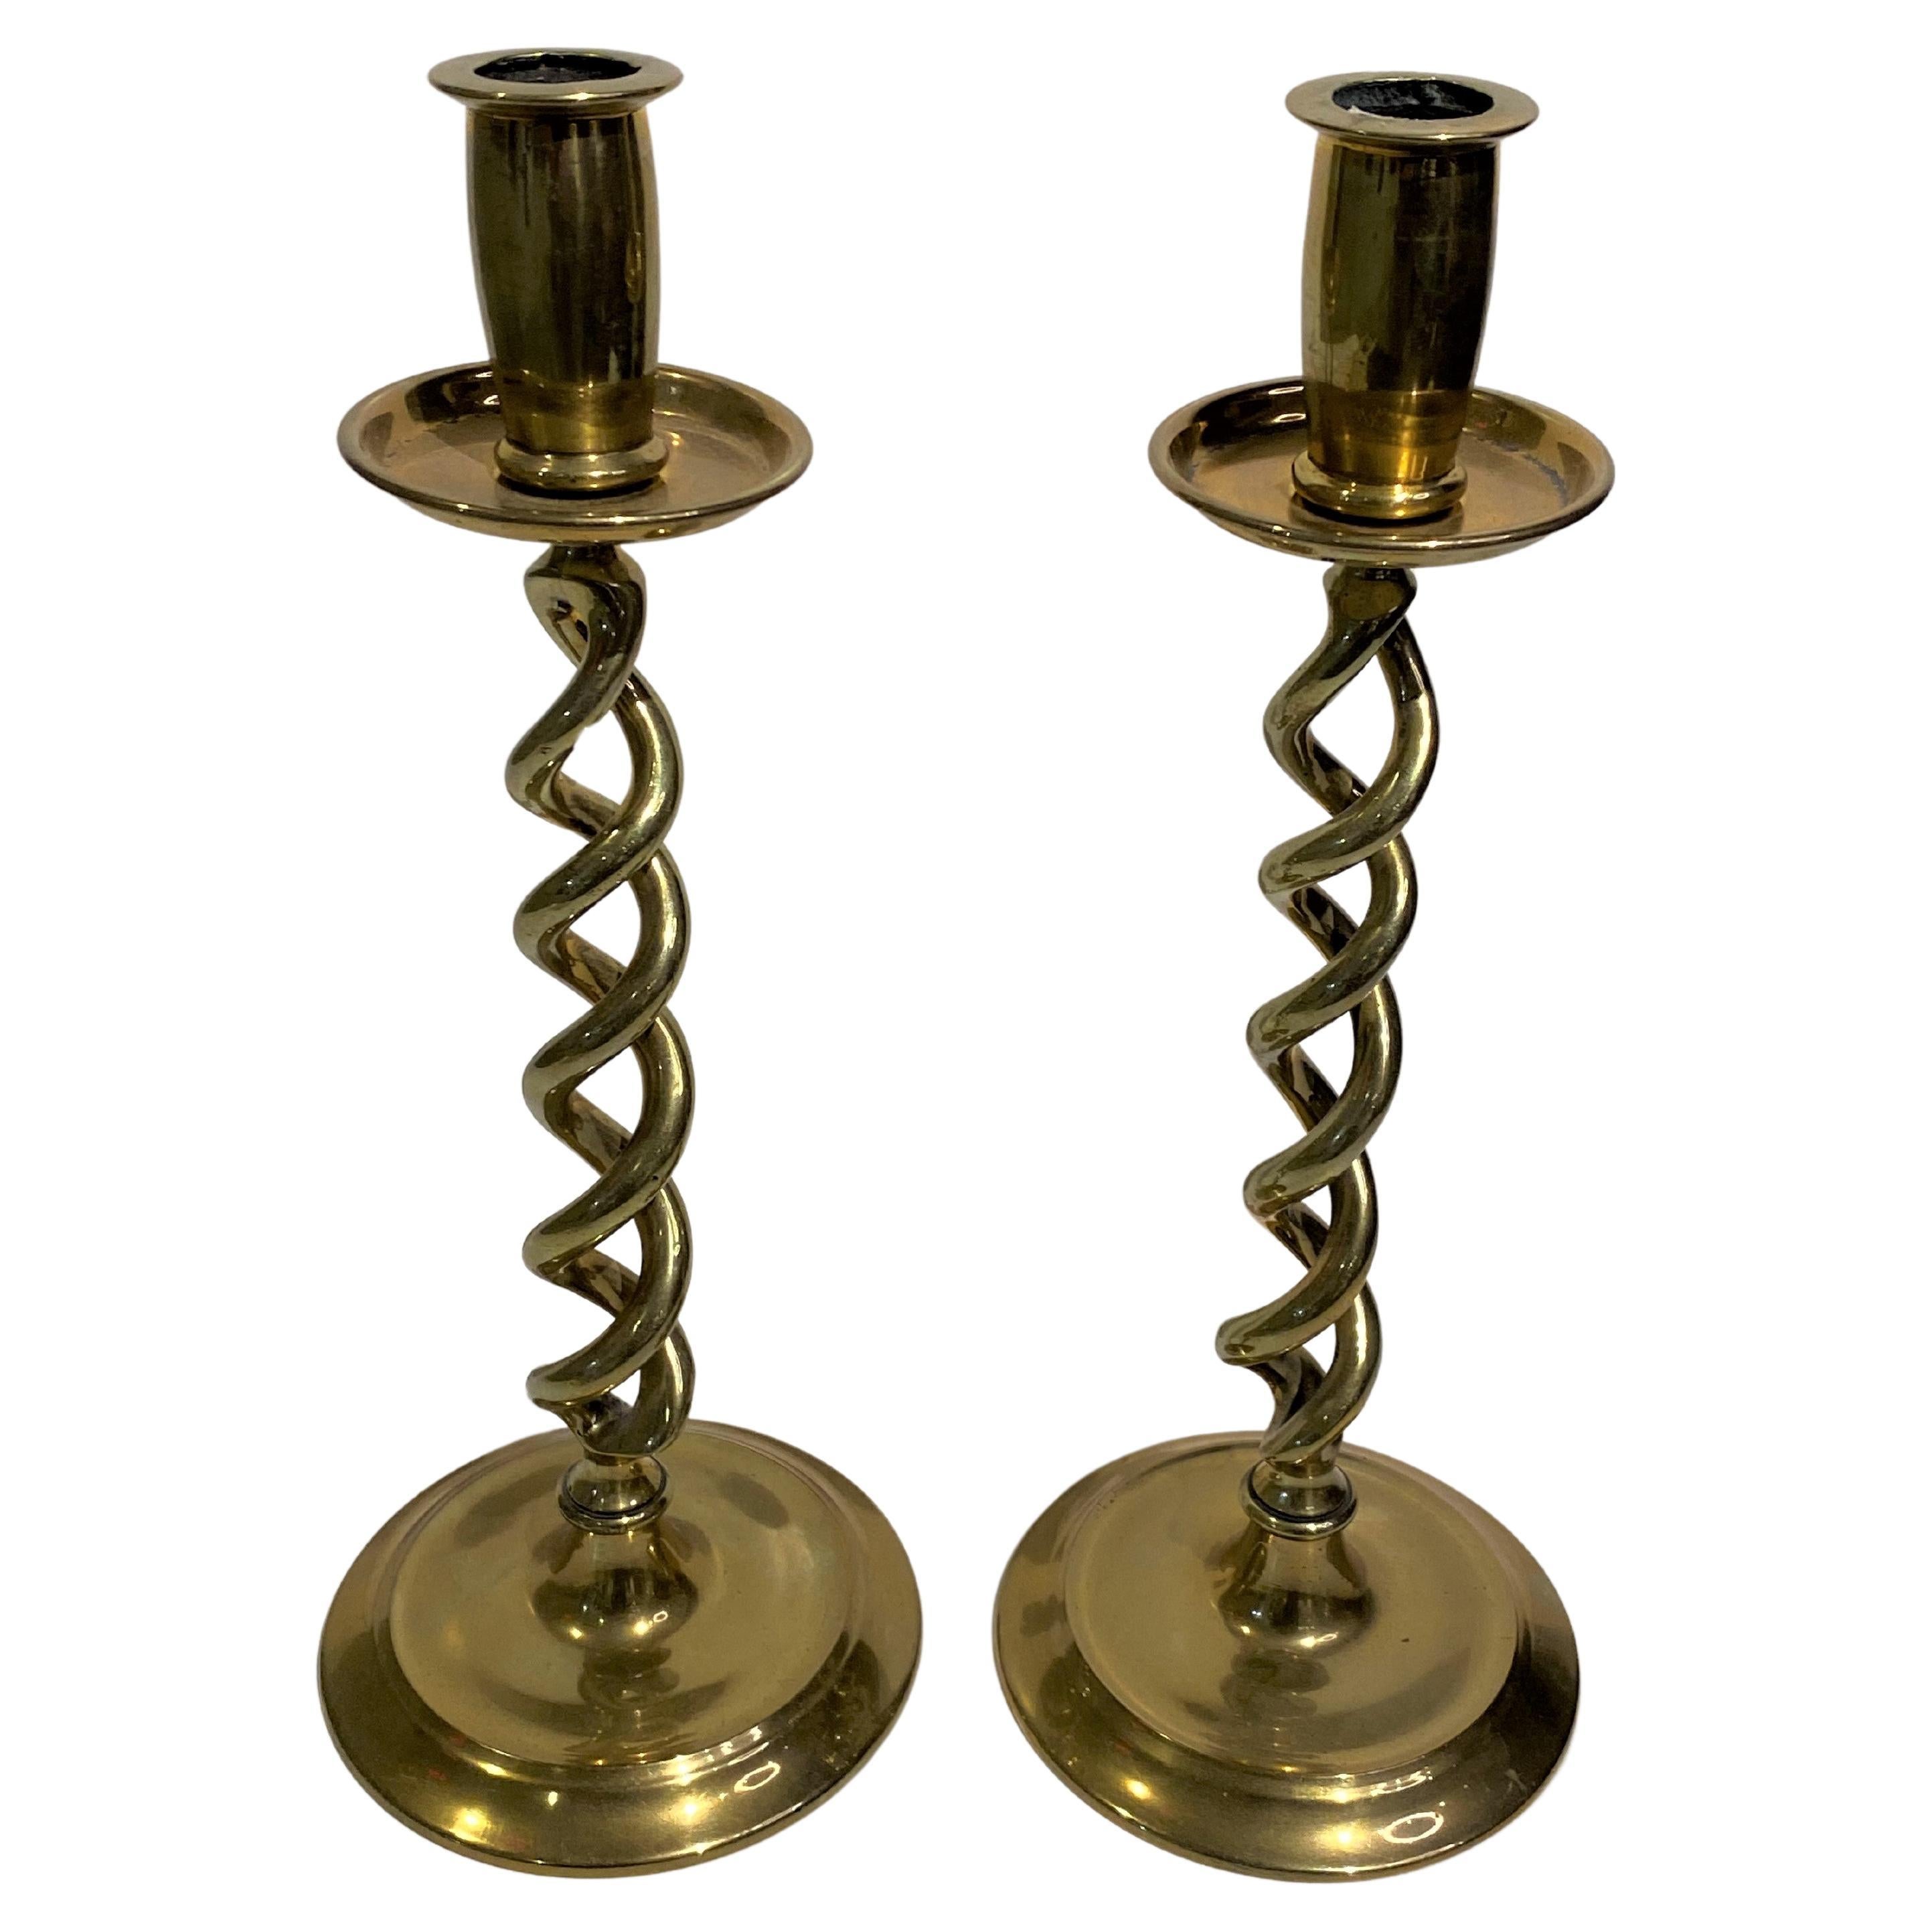 Pair of Old Open Twist Brass Candlesticks from England